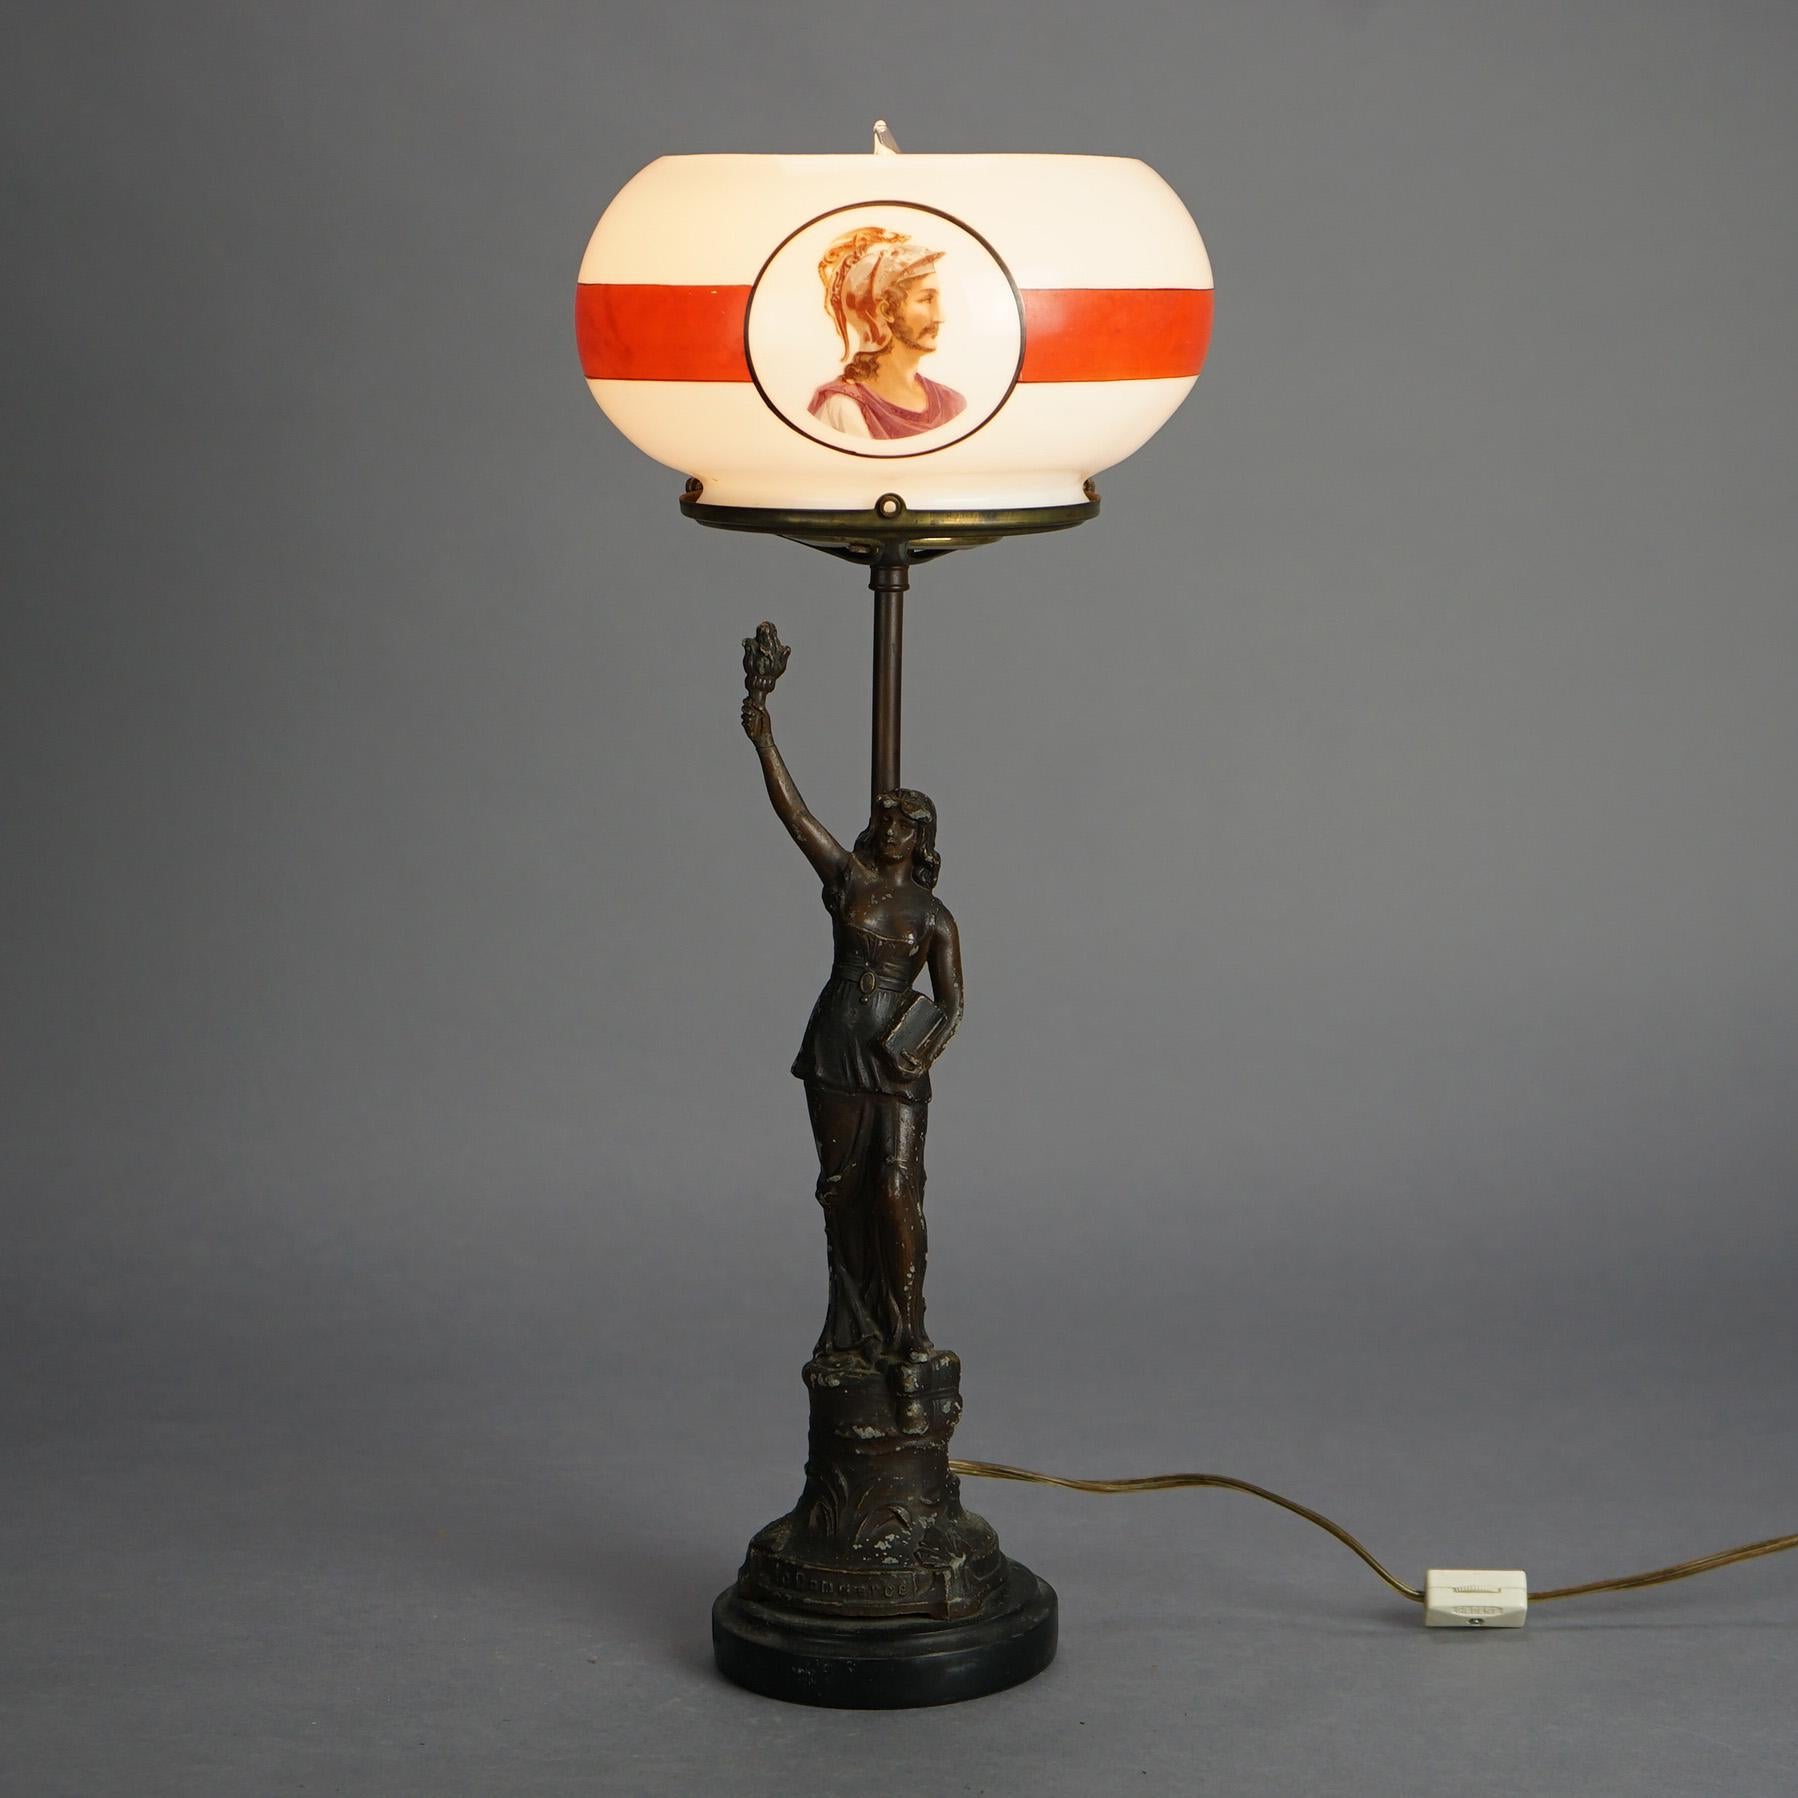 Antique Bronze Finished Figural Table Lamp with Woman, Book & Torch and having Portrait Glass Shade; Germany on Base, C1910

Measures- 19''H x 7.5''W x 7.5''D